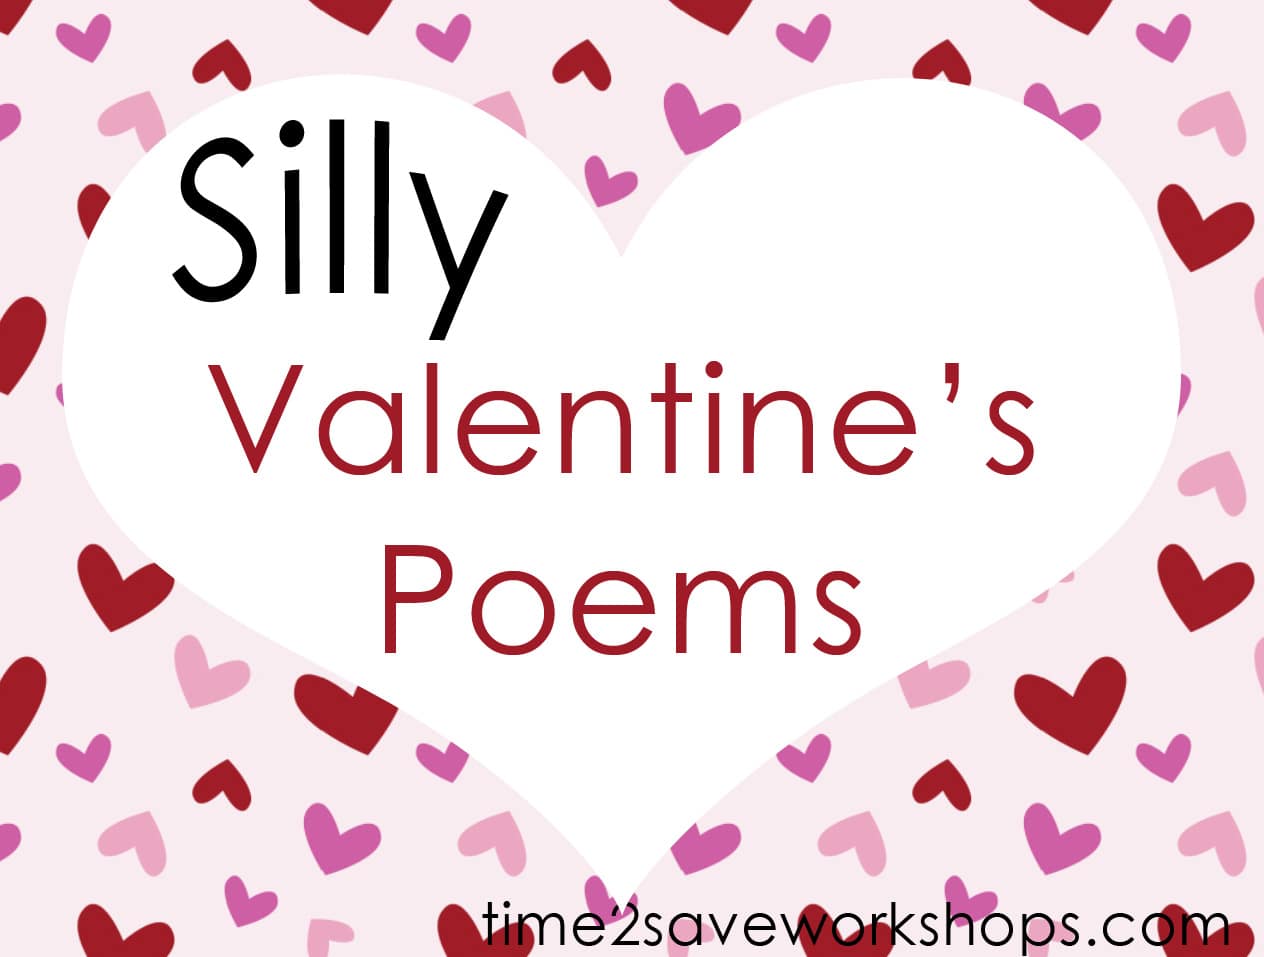 Silly Poems Valentine's Fun with Words Poems for Children!  Kasey Trenum